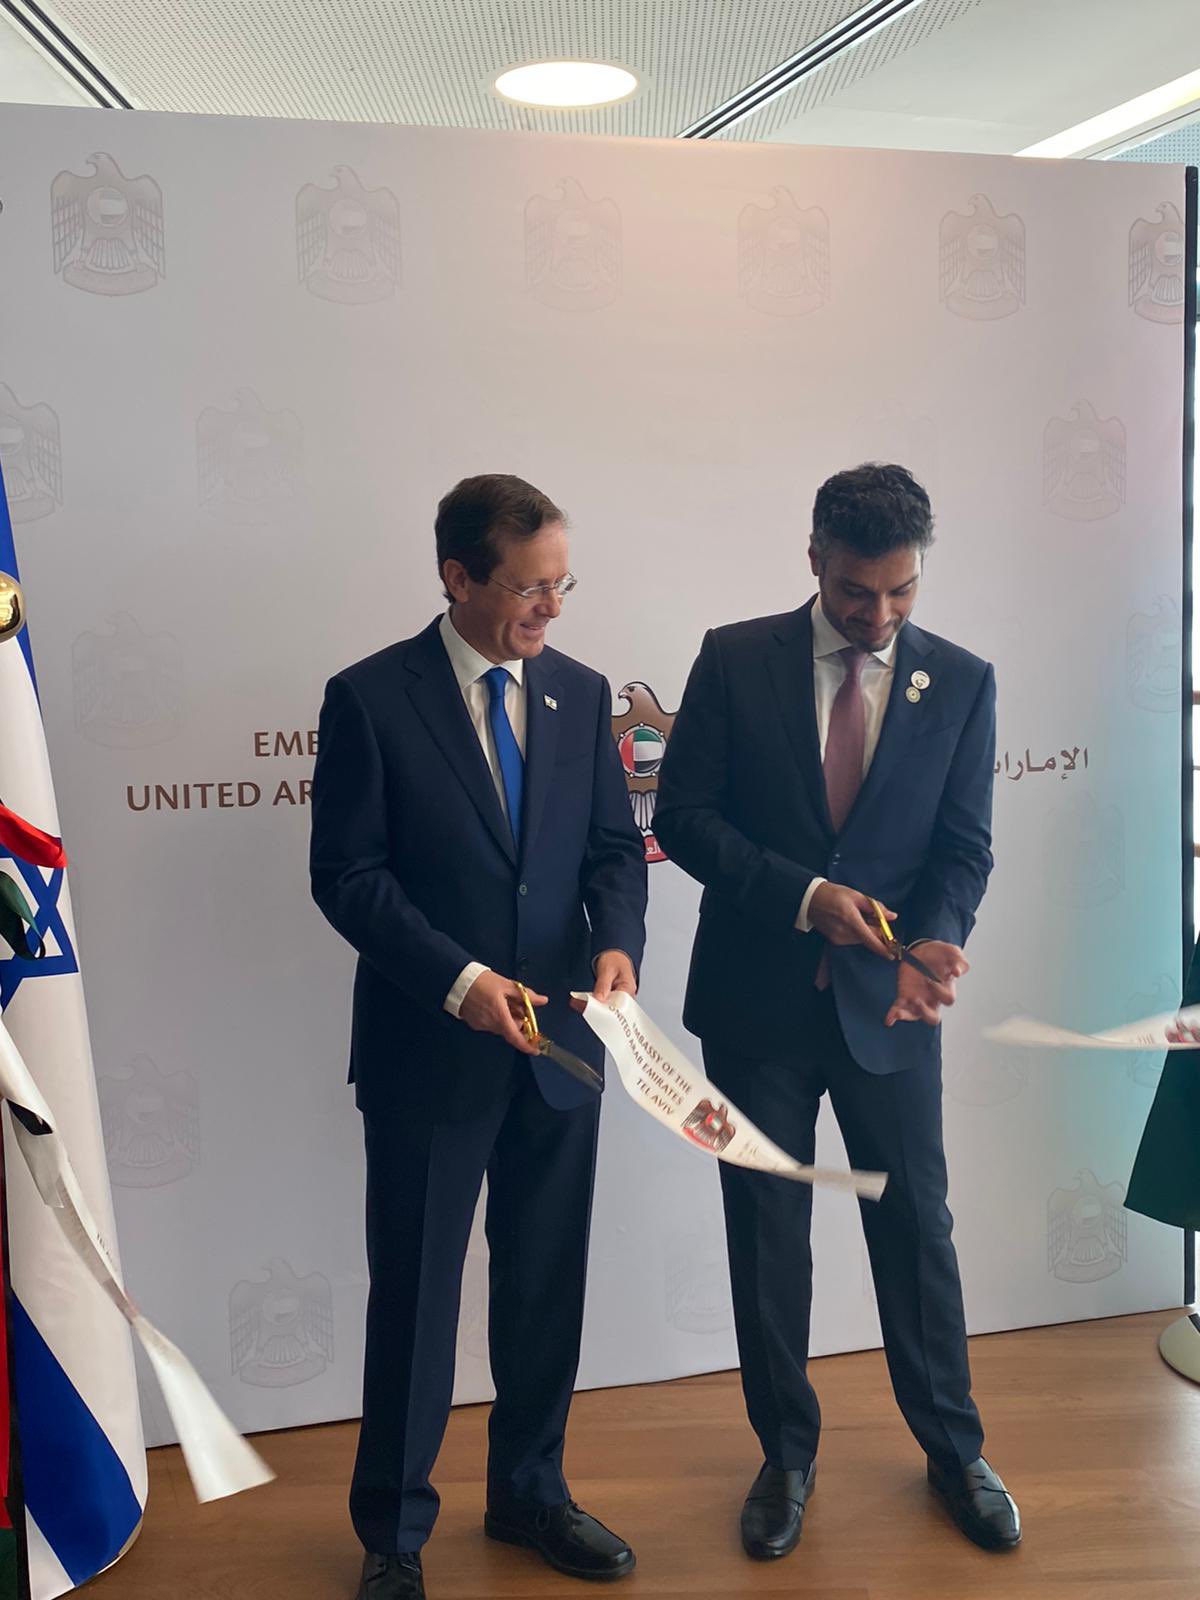 The Emirates Embassy in Israel has officially opened CITI